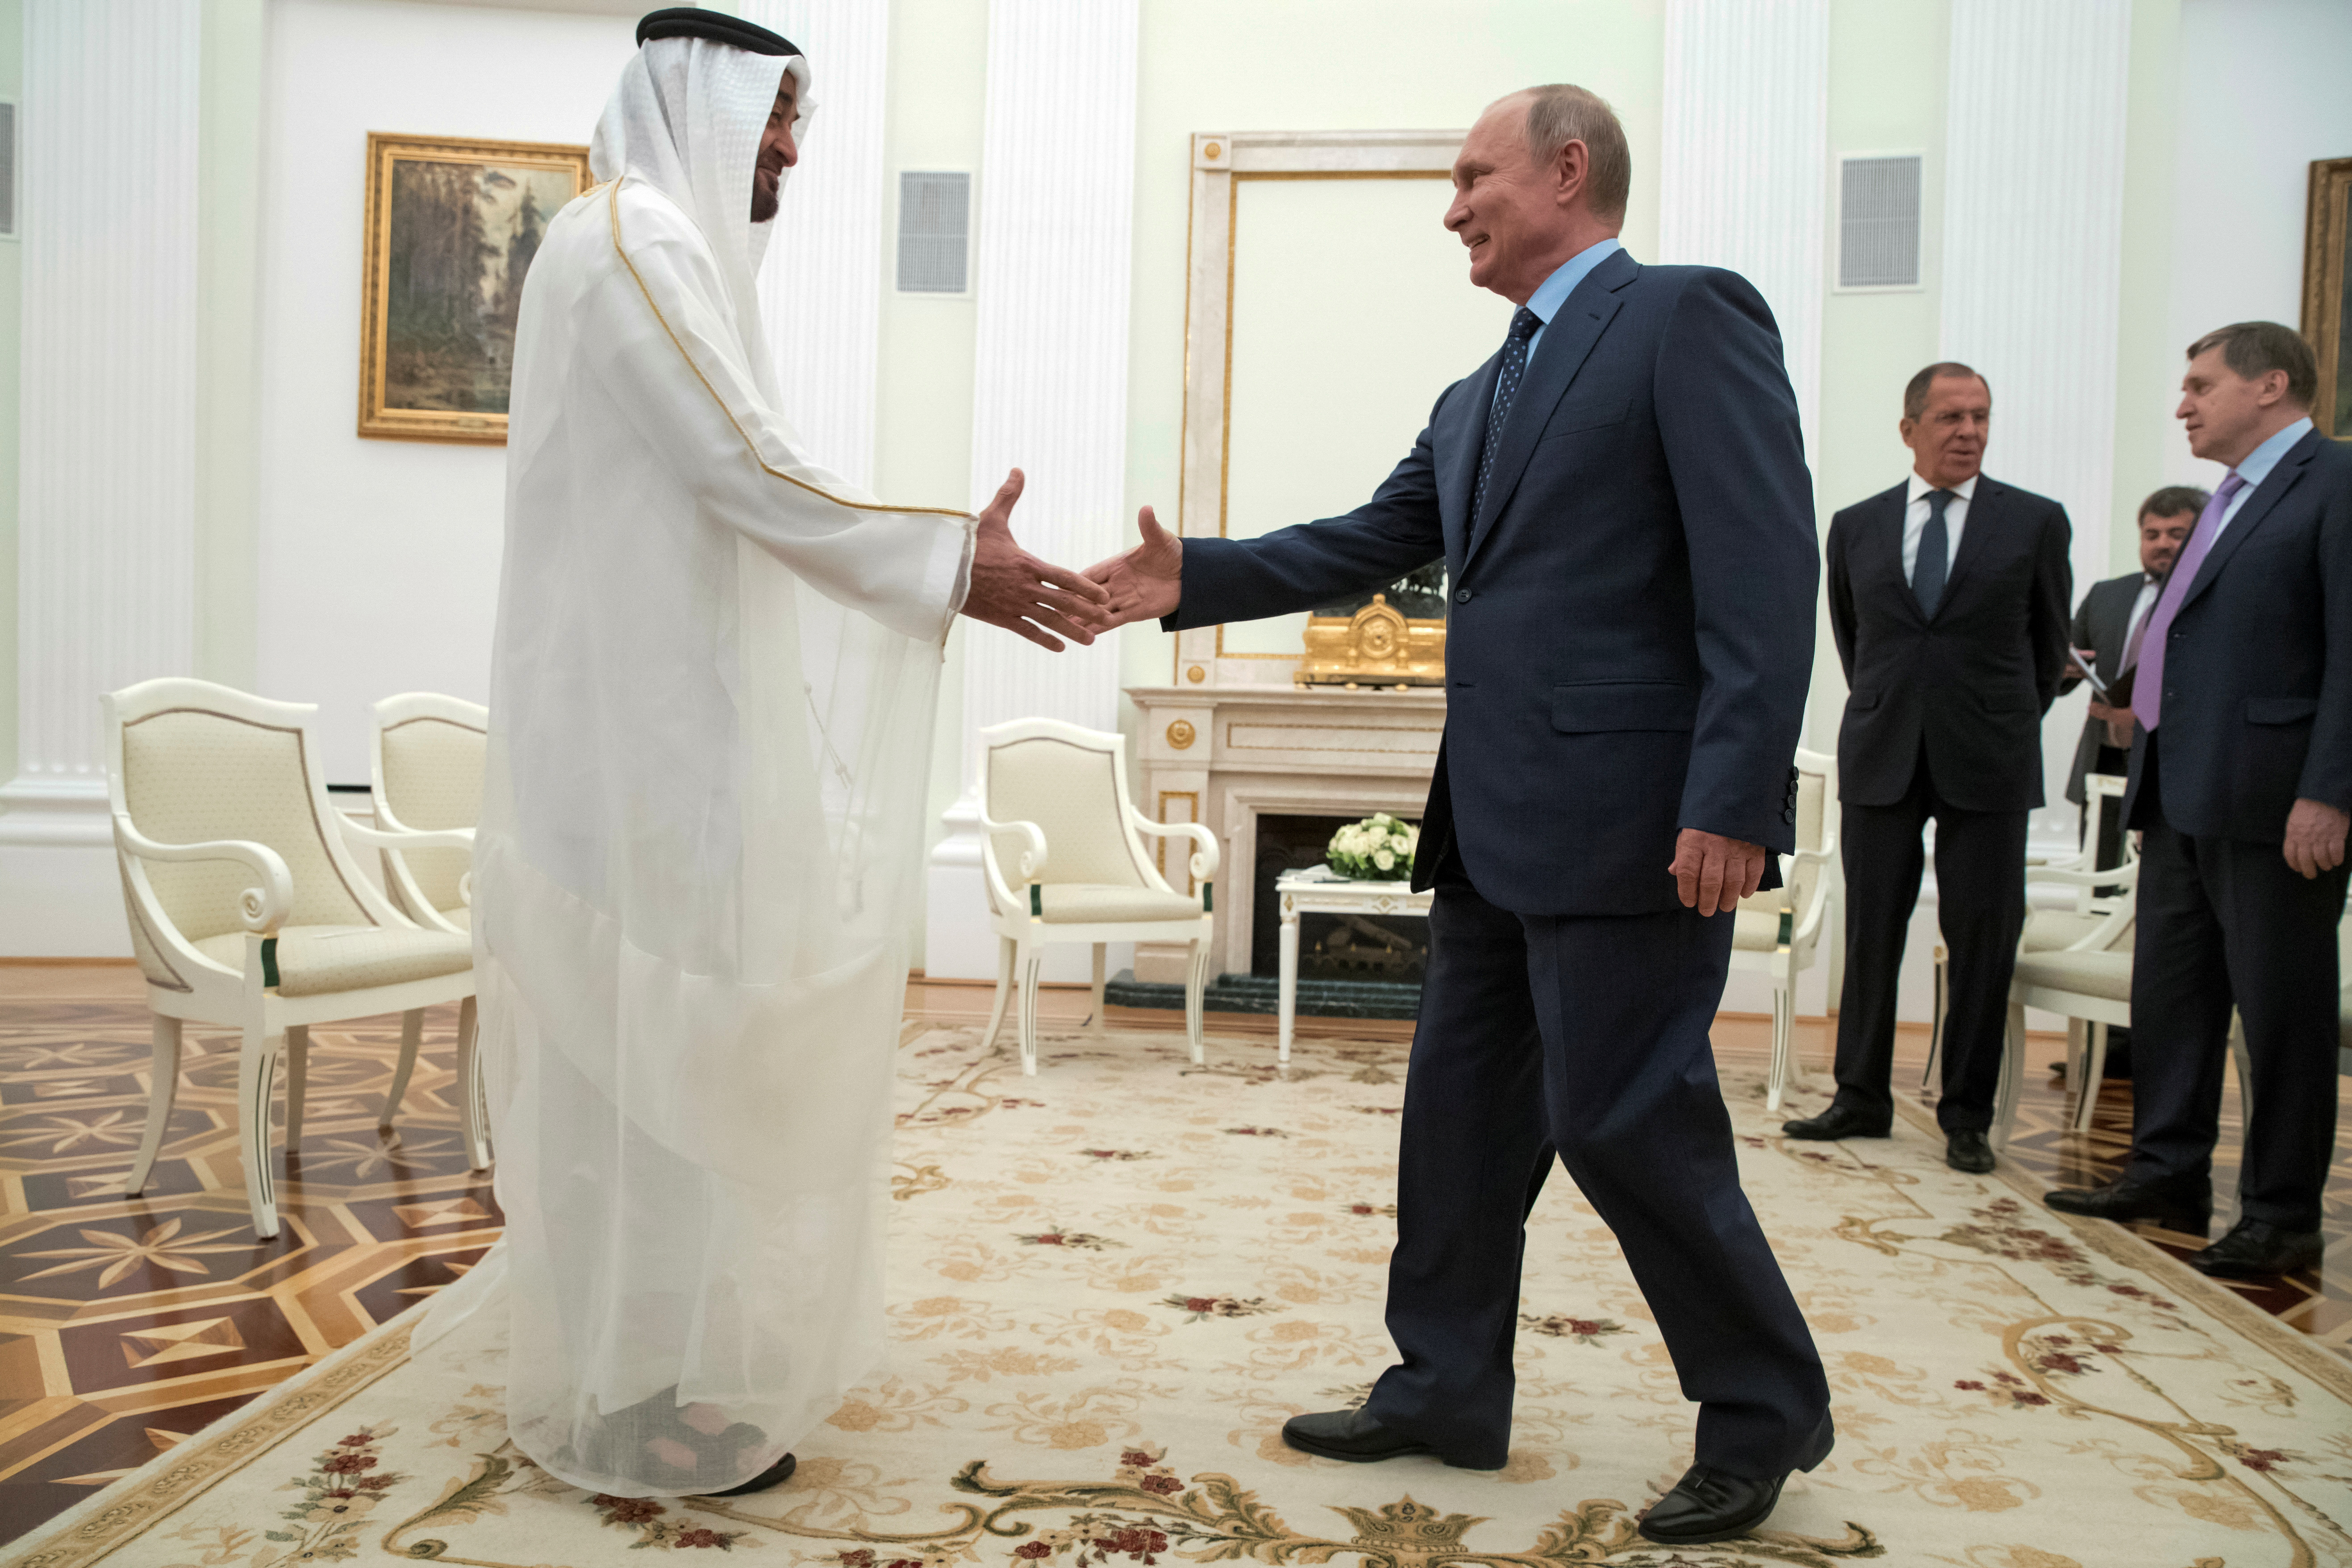 Russian President Vladimir Putin meets with Abu Dhabi's Crown Prince Sheikh Mohammed bin Zayed al-Nahyan of the United Arab Emirates in Moscow